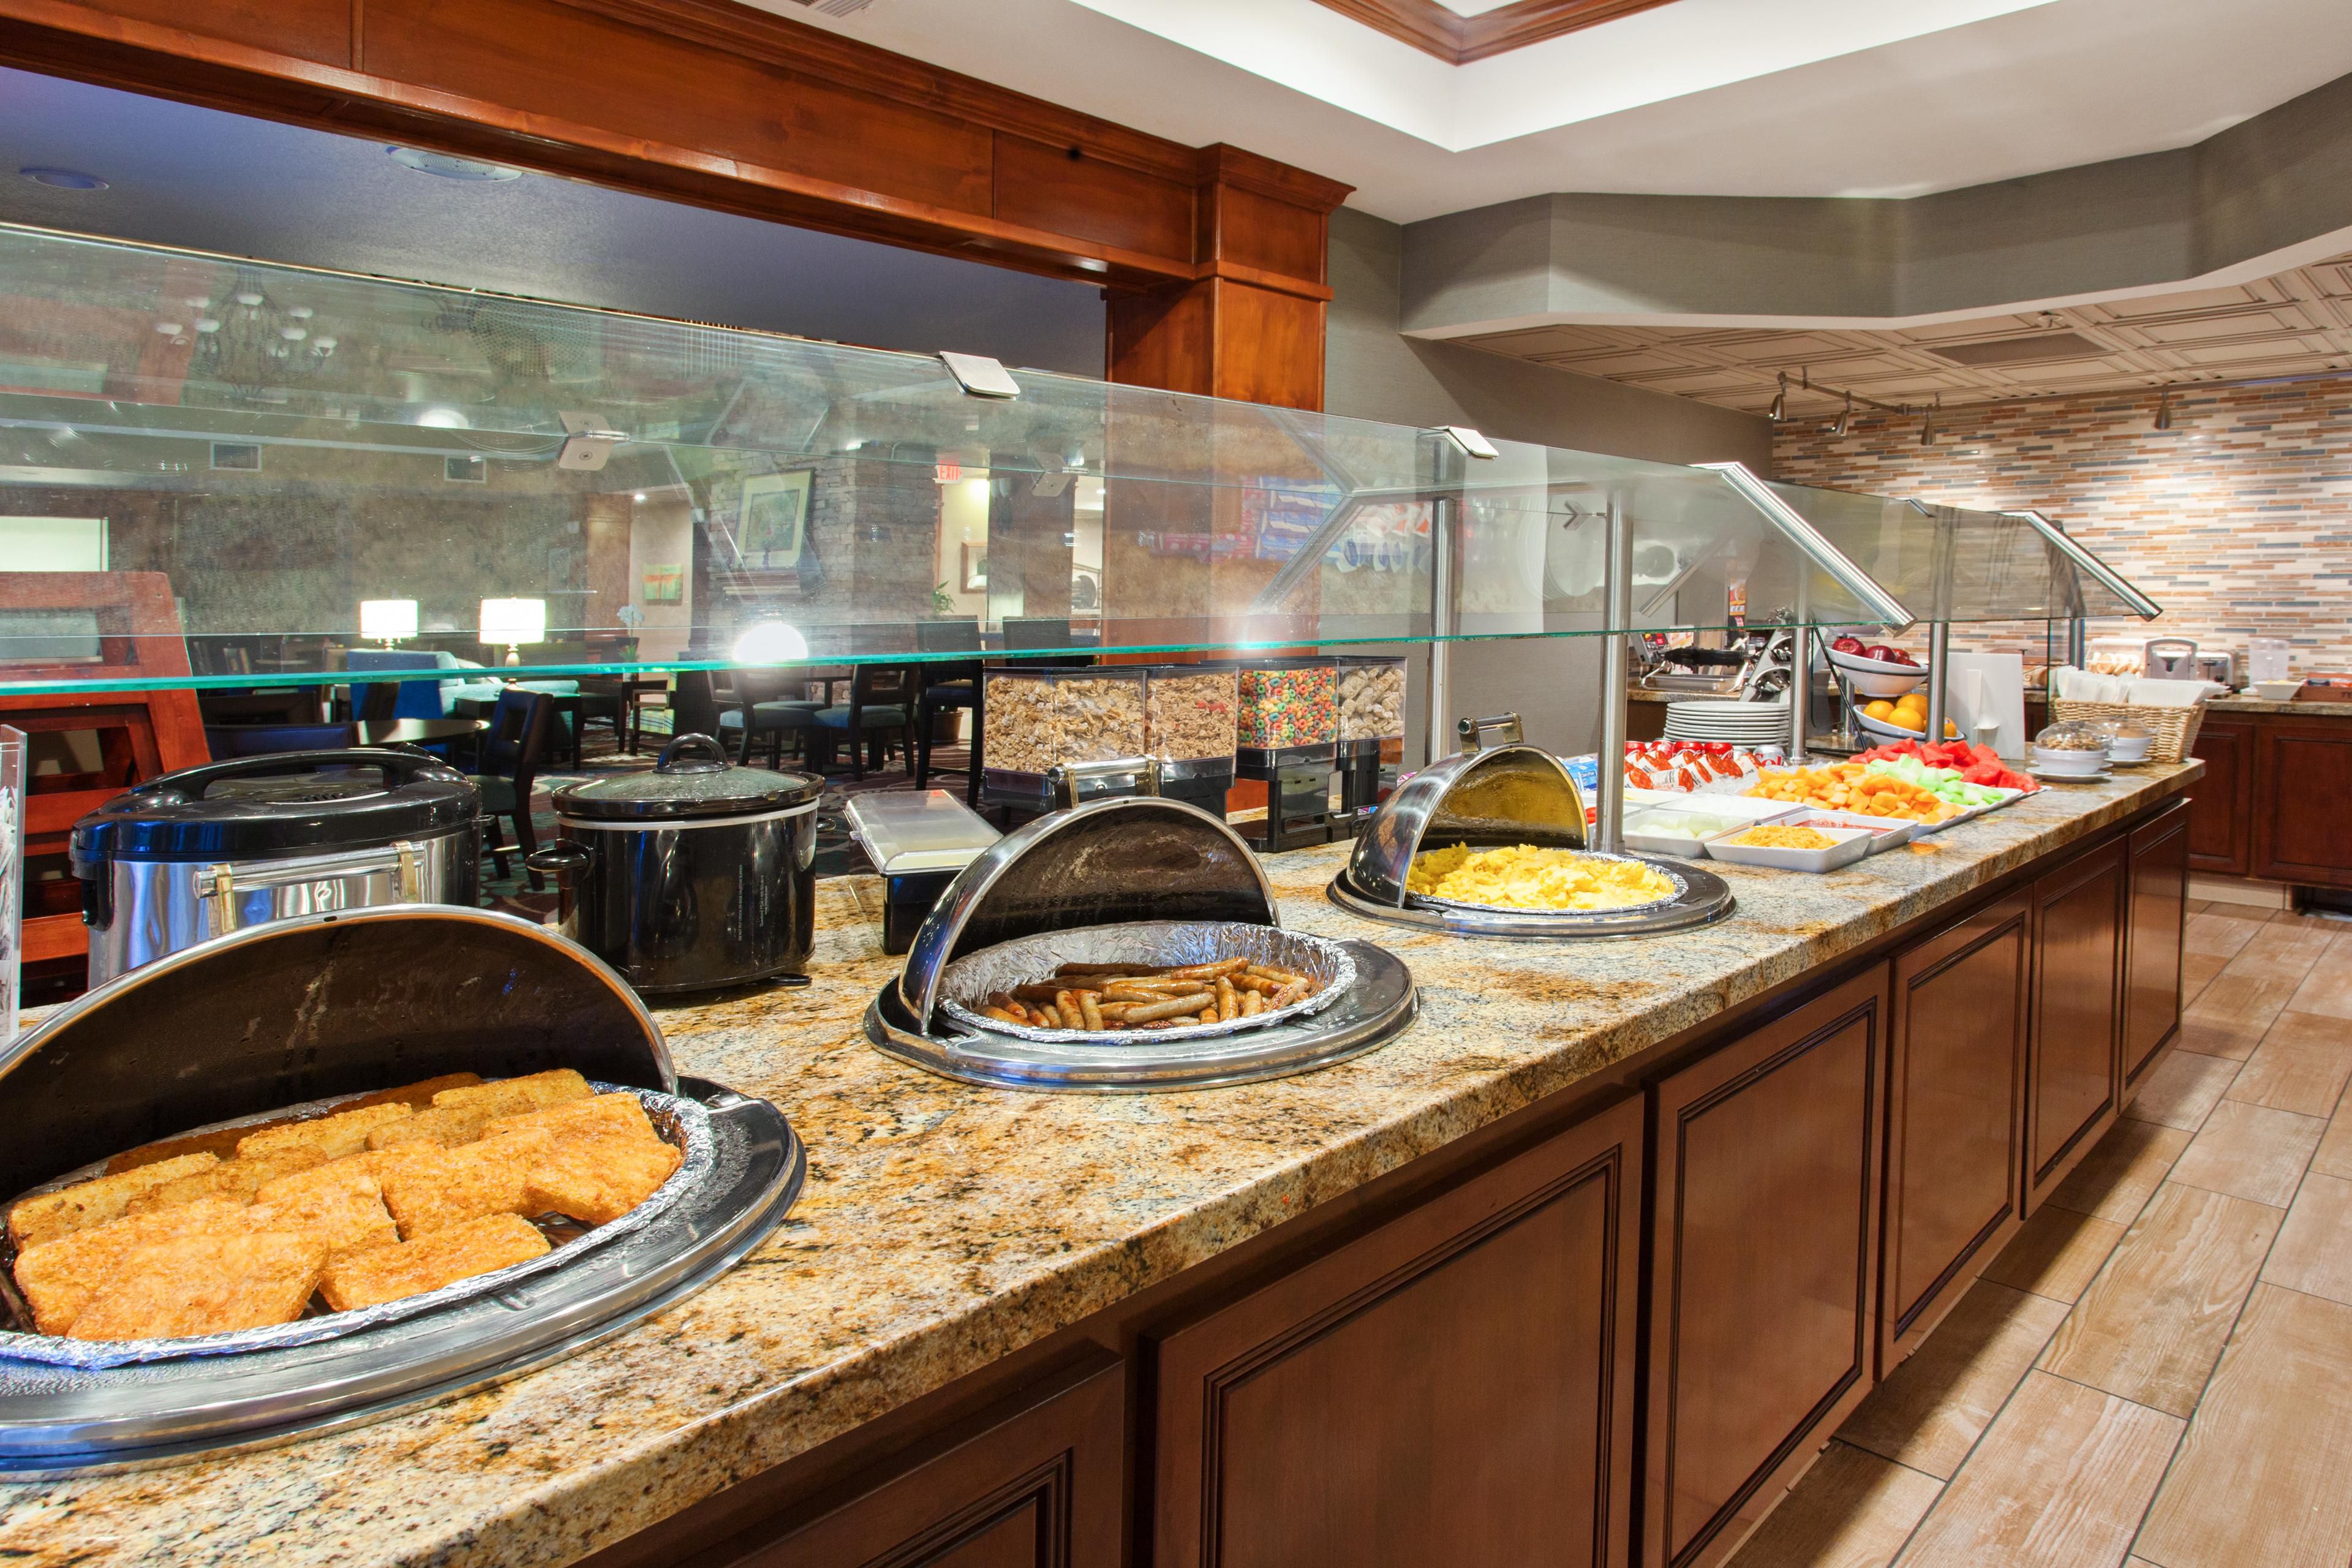 All items for breakfast will be provided in To Go Containers served by our staff. "Start your day off right with our hot buffet breakfast served daily starting at 6:30am - 9:30am Monday - Friday and 7:30am - 10:30am Saturday & Sunday. Enjoy freshly baked blueberry muffins! 